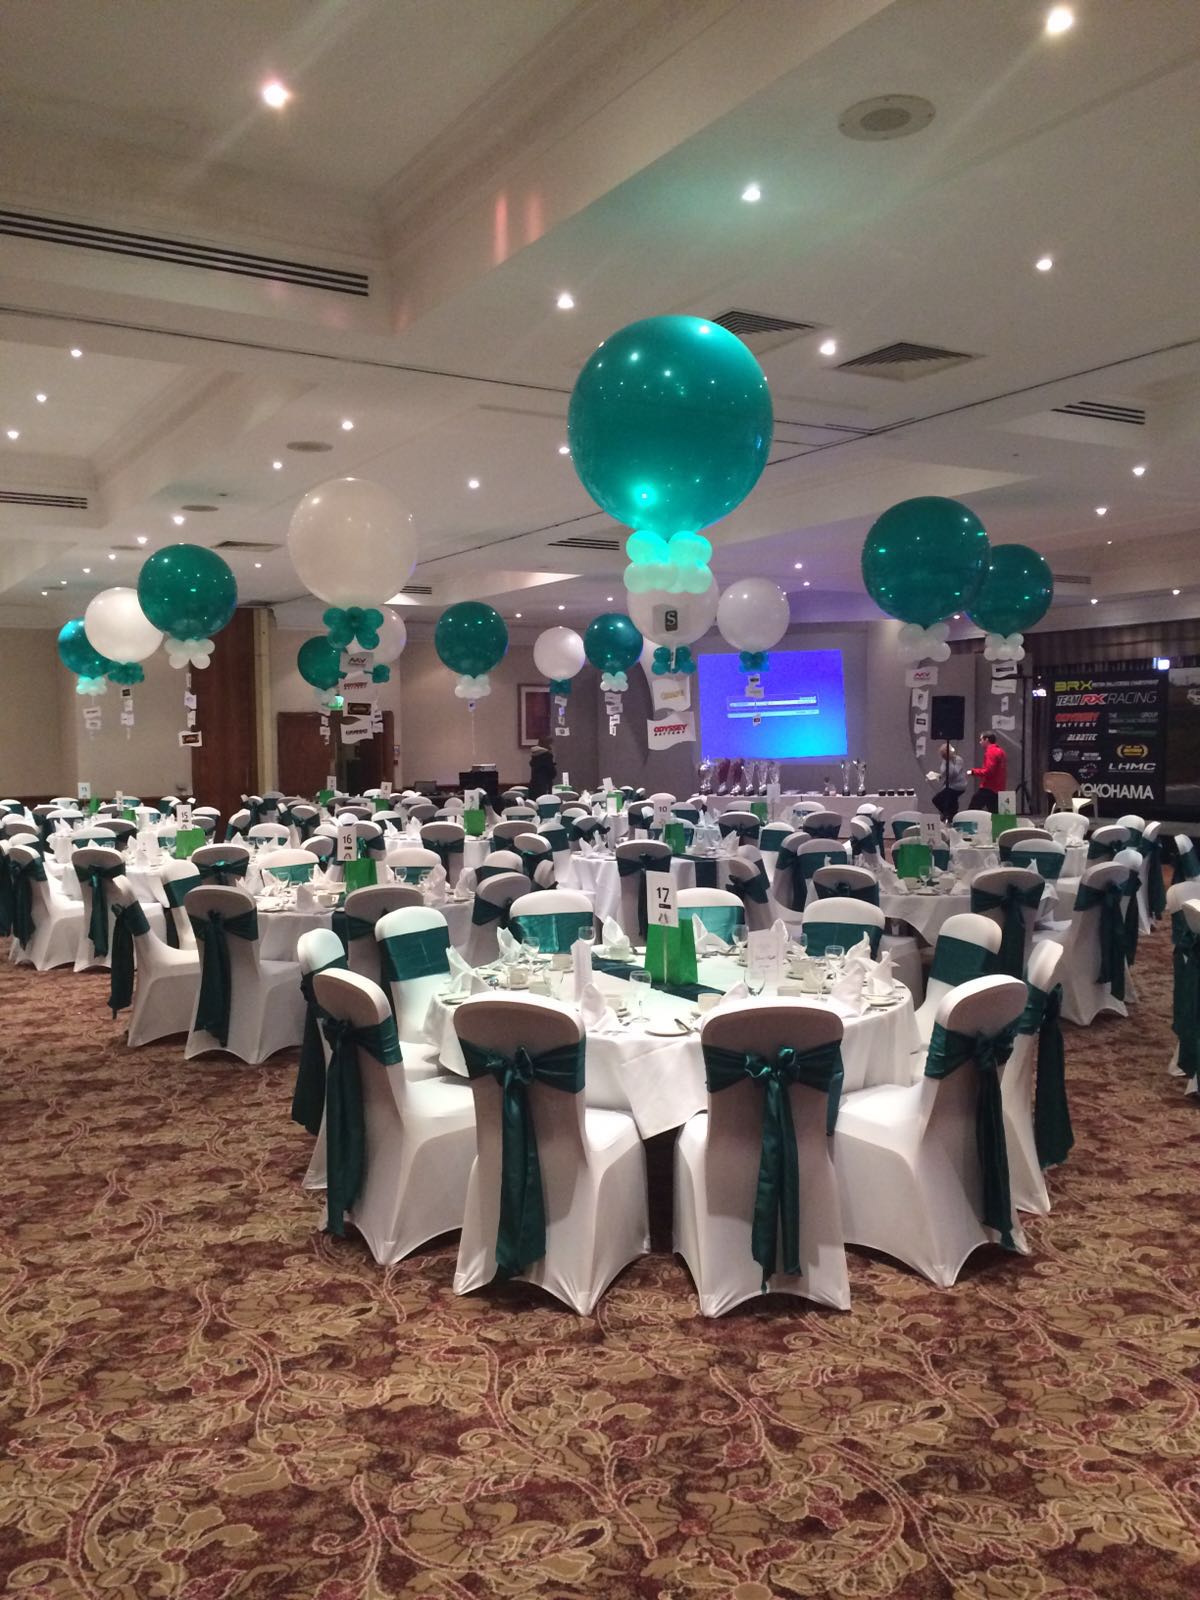 You are currently viewing Team RX Racing Annual Awards. Hilton Coventry. 3 Foot Balloons. Floating